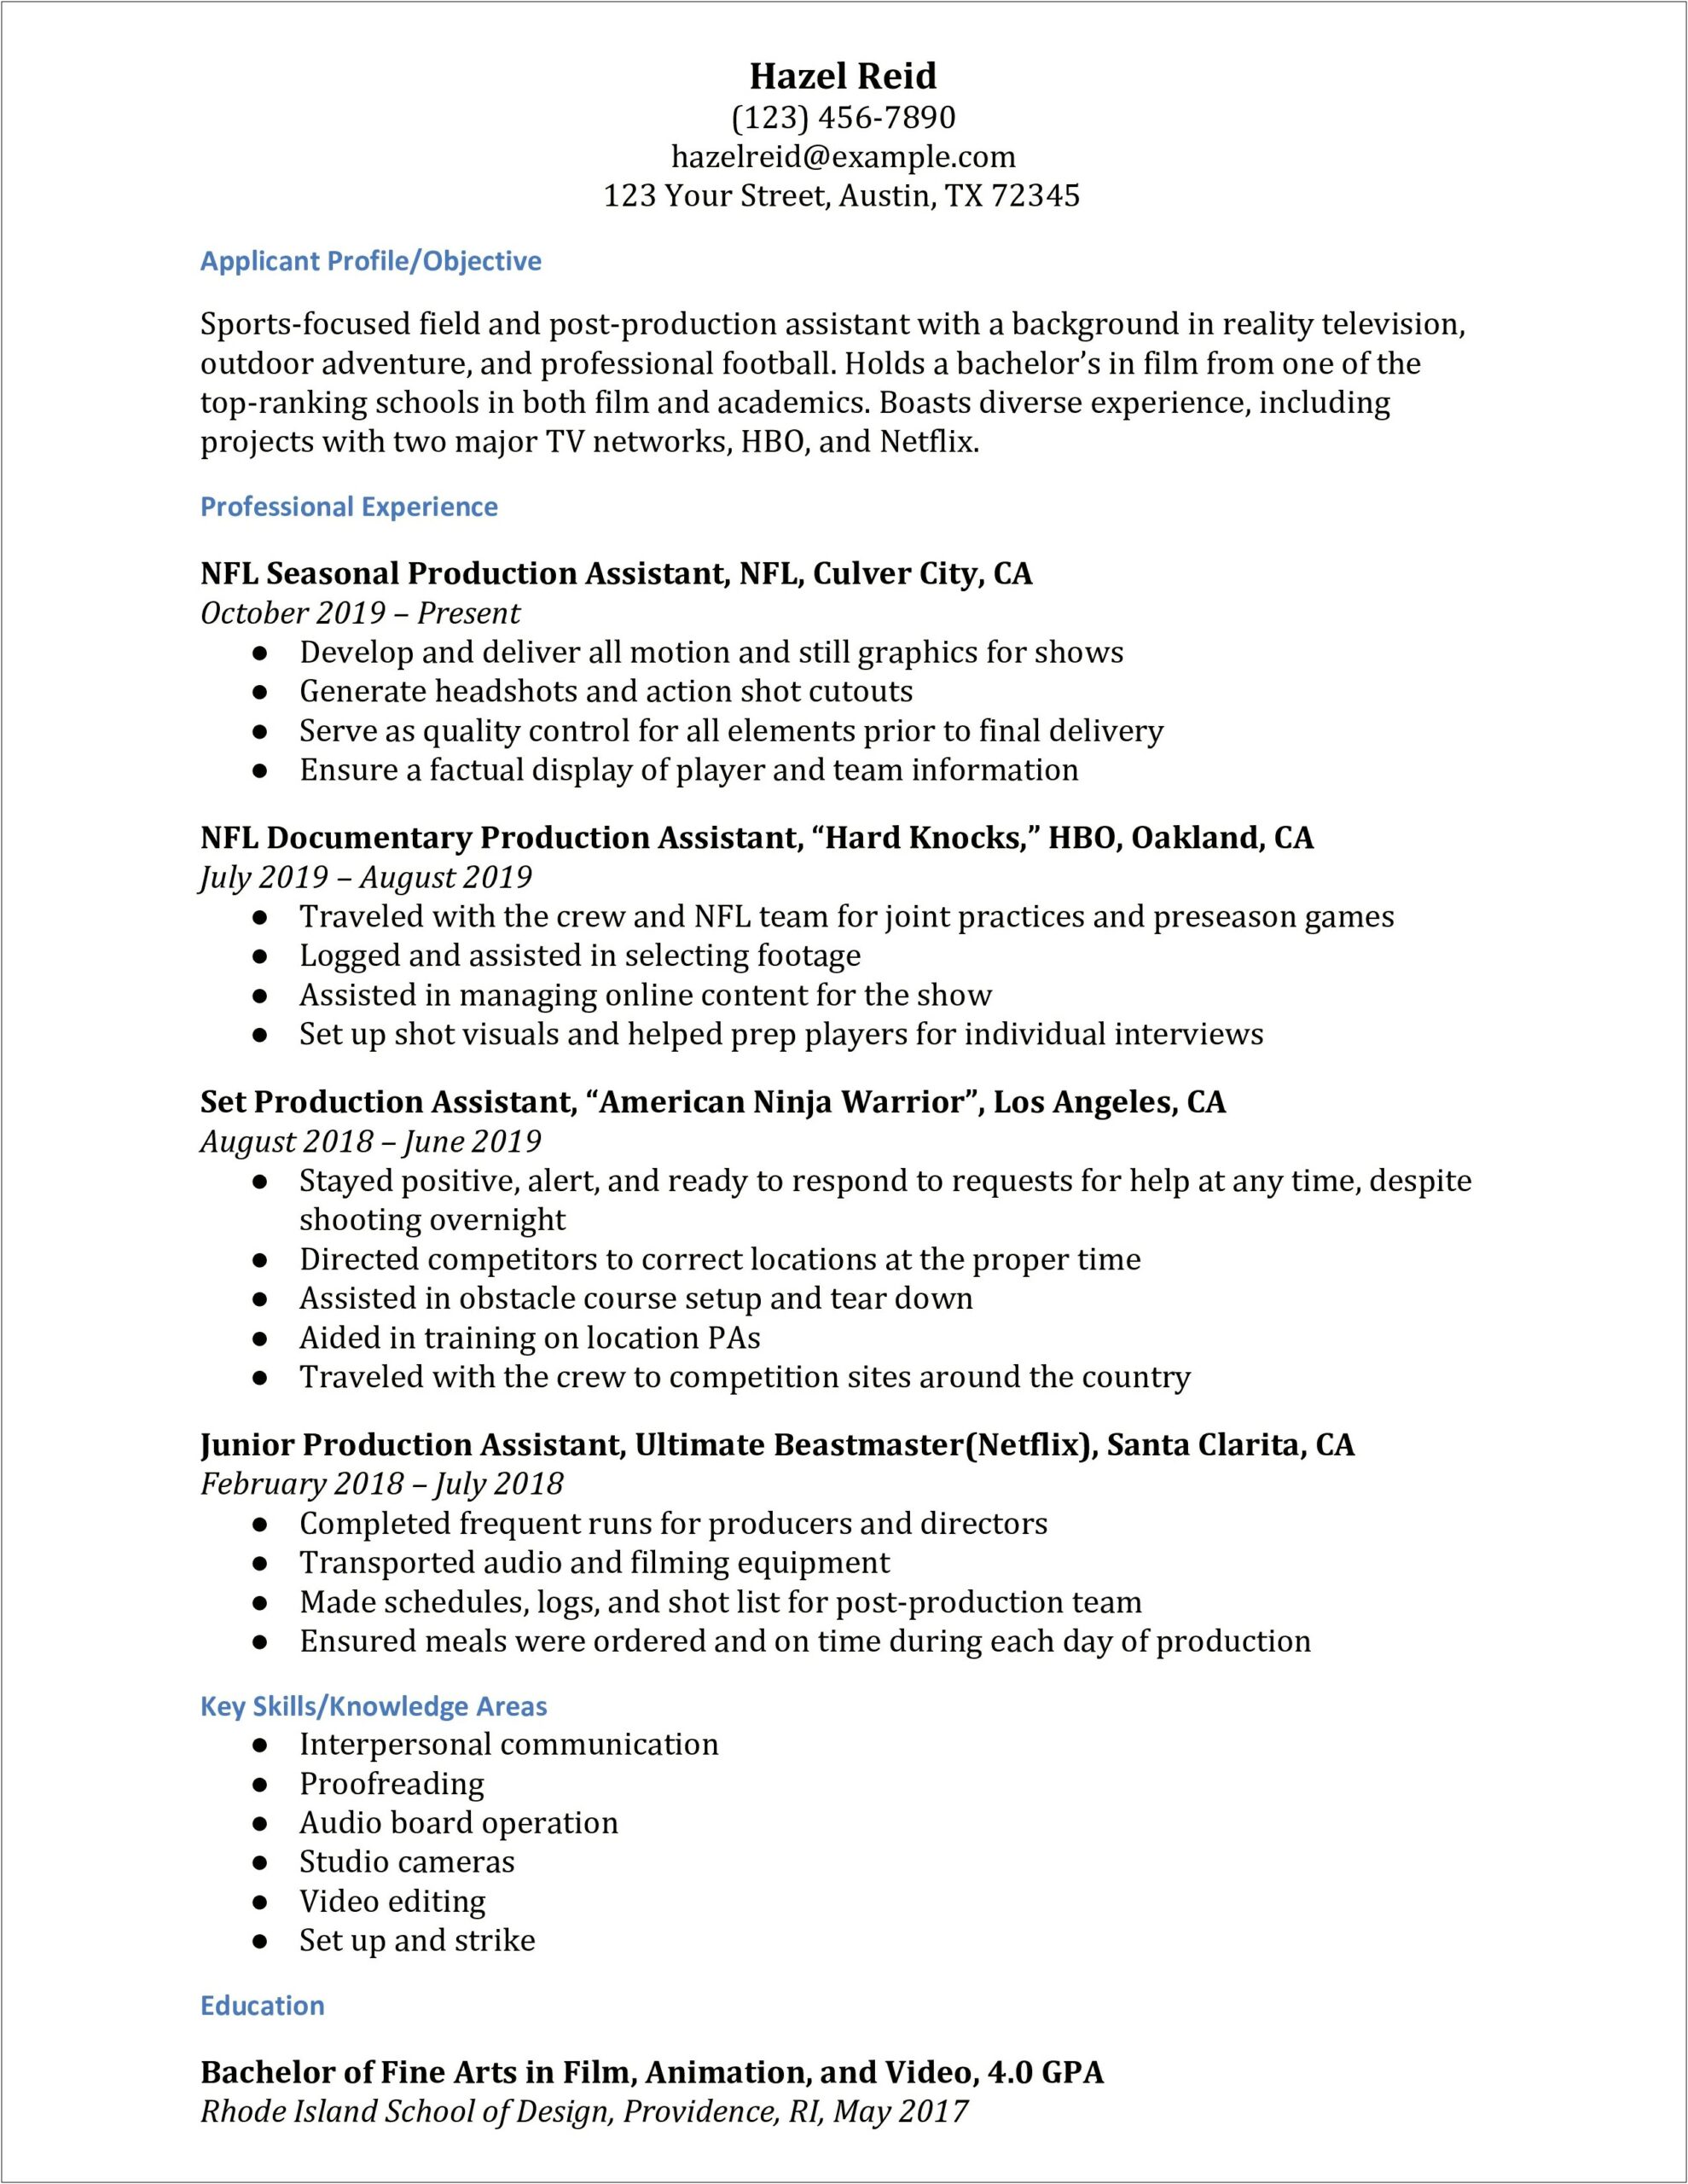 Example Of A Film Production Assistant Resume